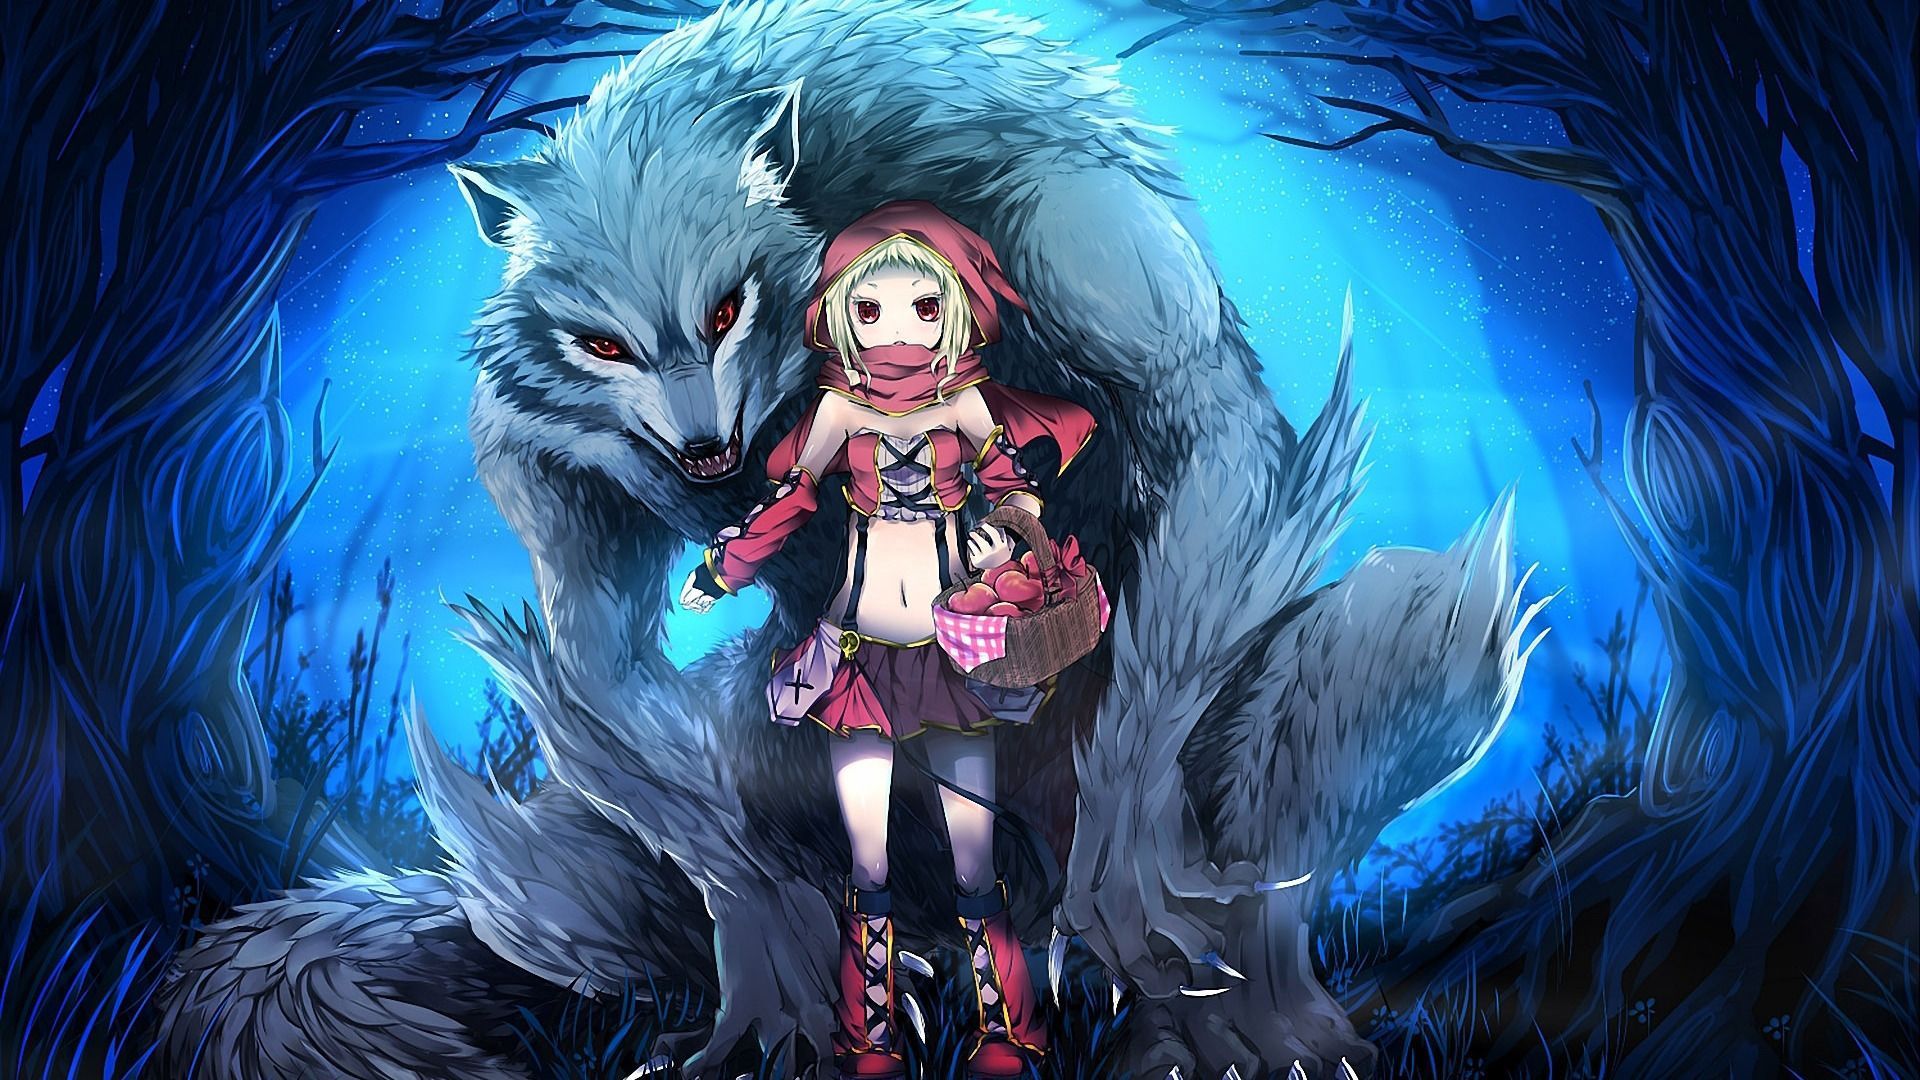 awesome red riding hood anime HD wallpaper 17260. Red riding hood